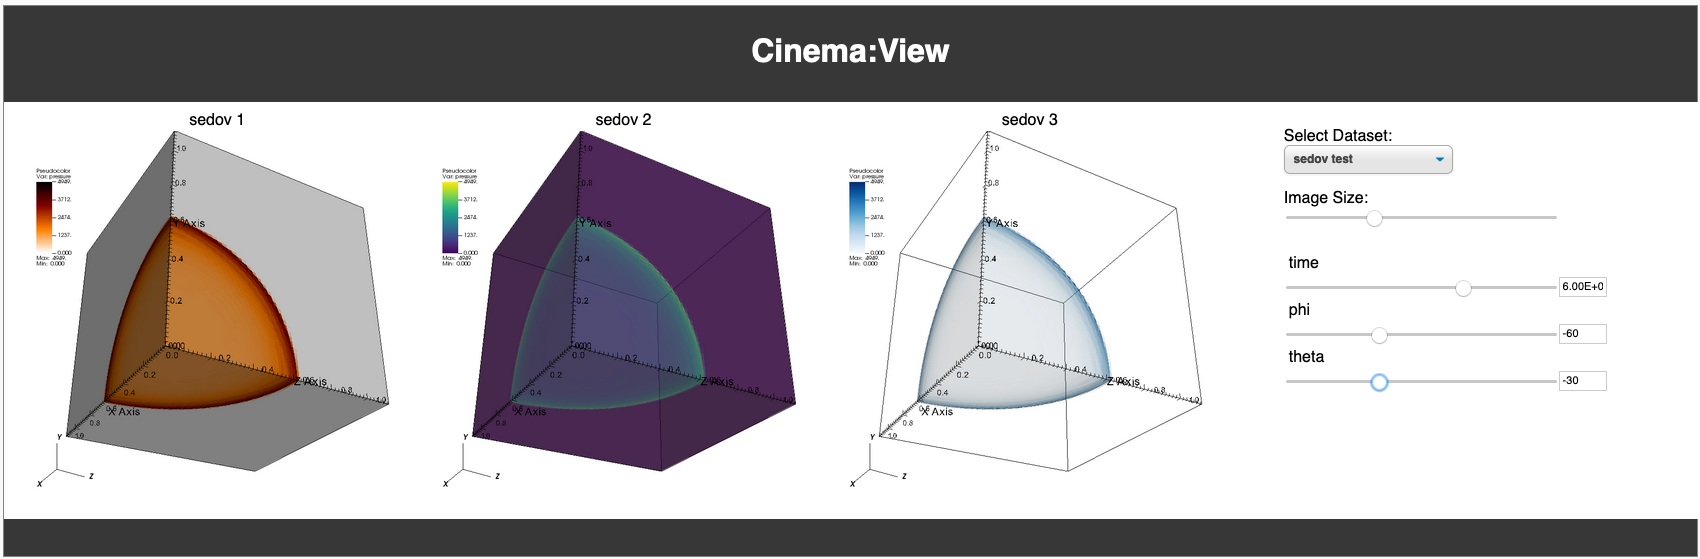 Three different versions of the Sedov blast wave viewed in Cinema:View.